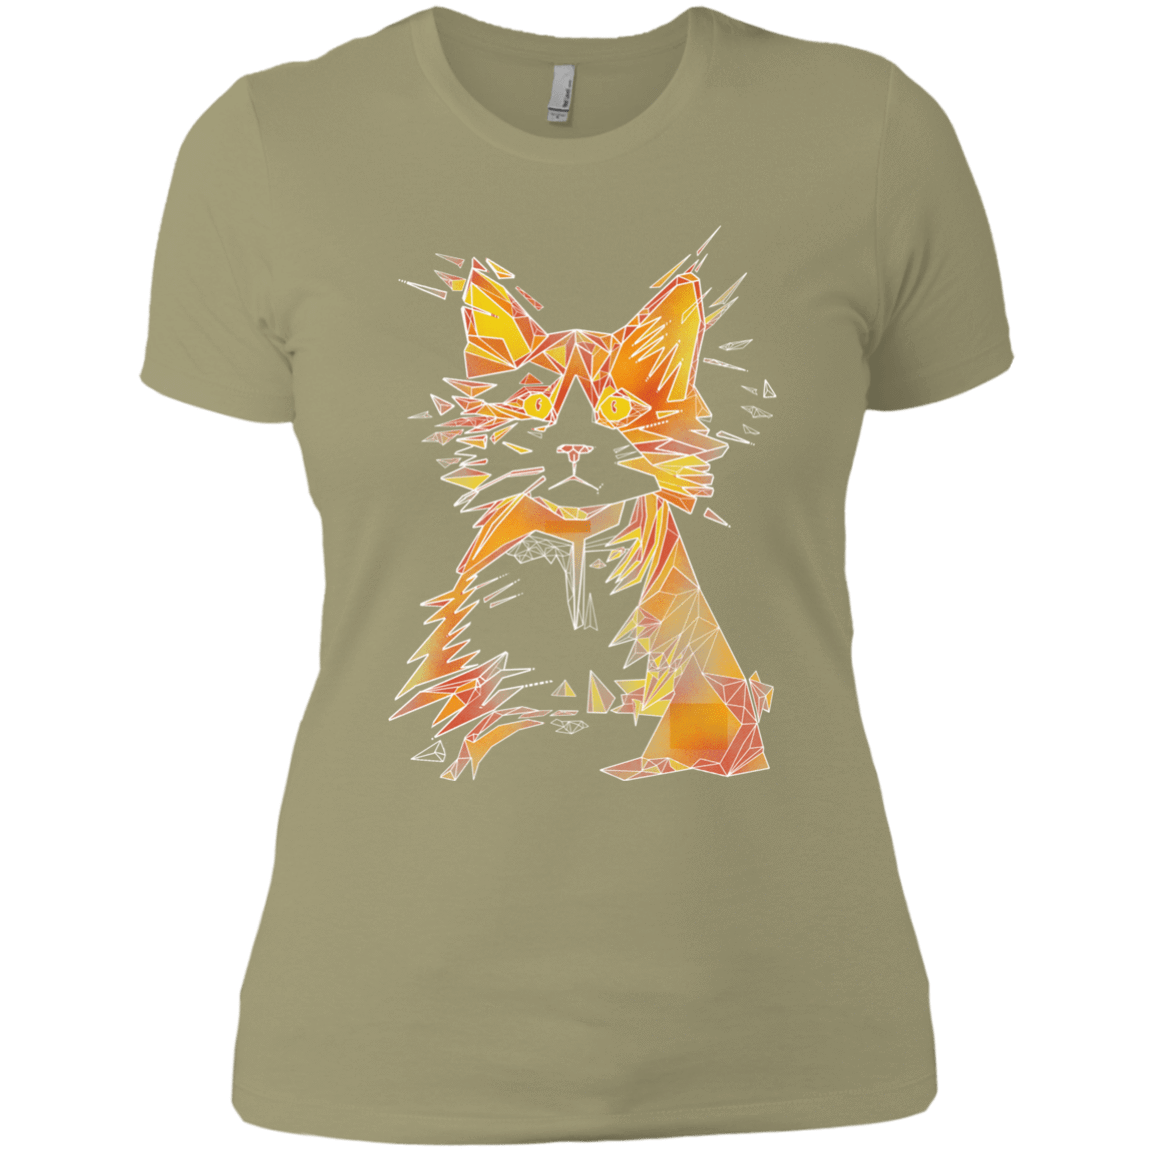 T-Shirts Light Olive / X-Small Scattered Women's Premium T-Shirt